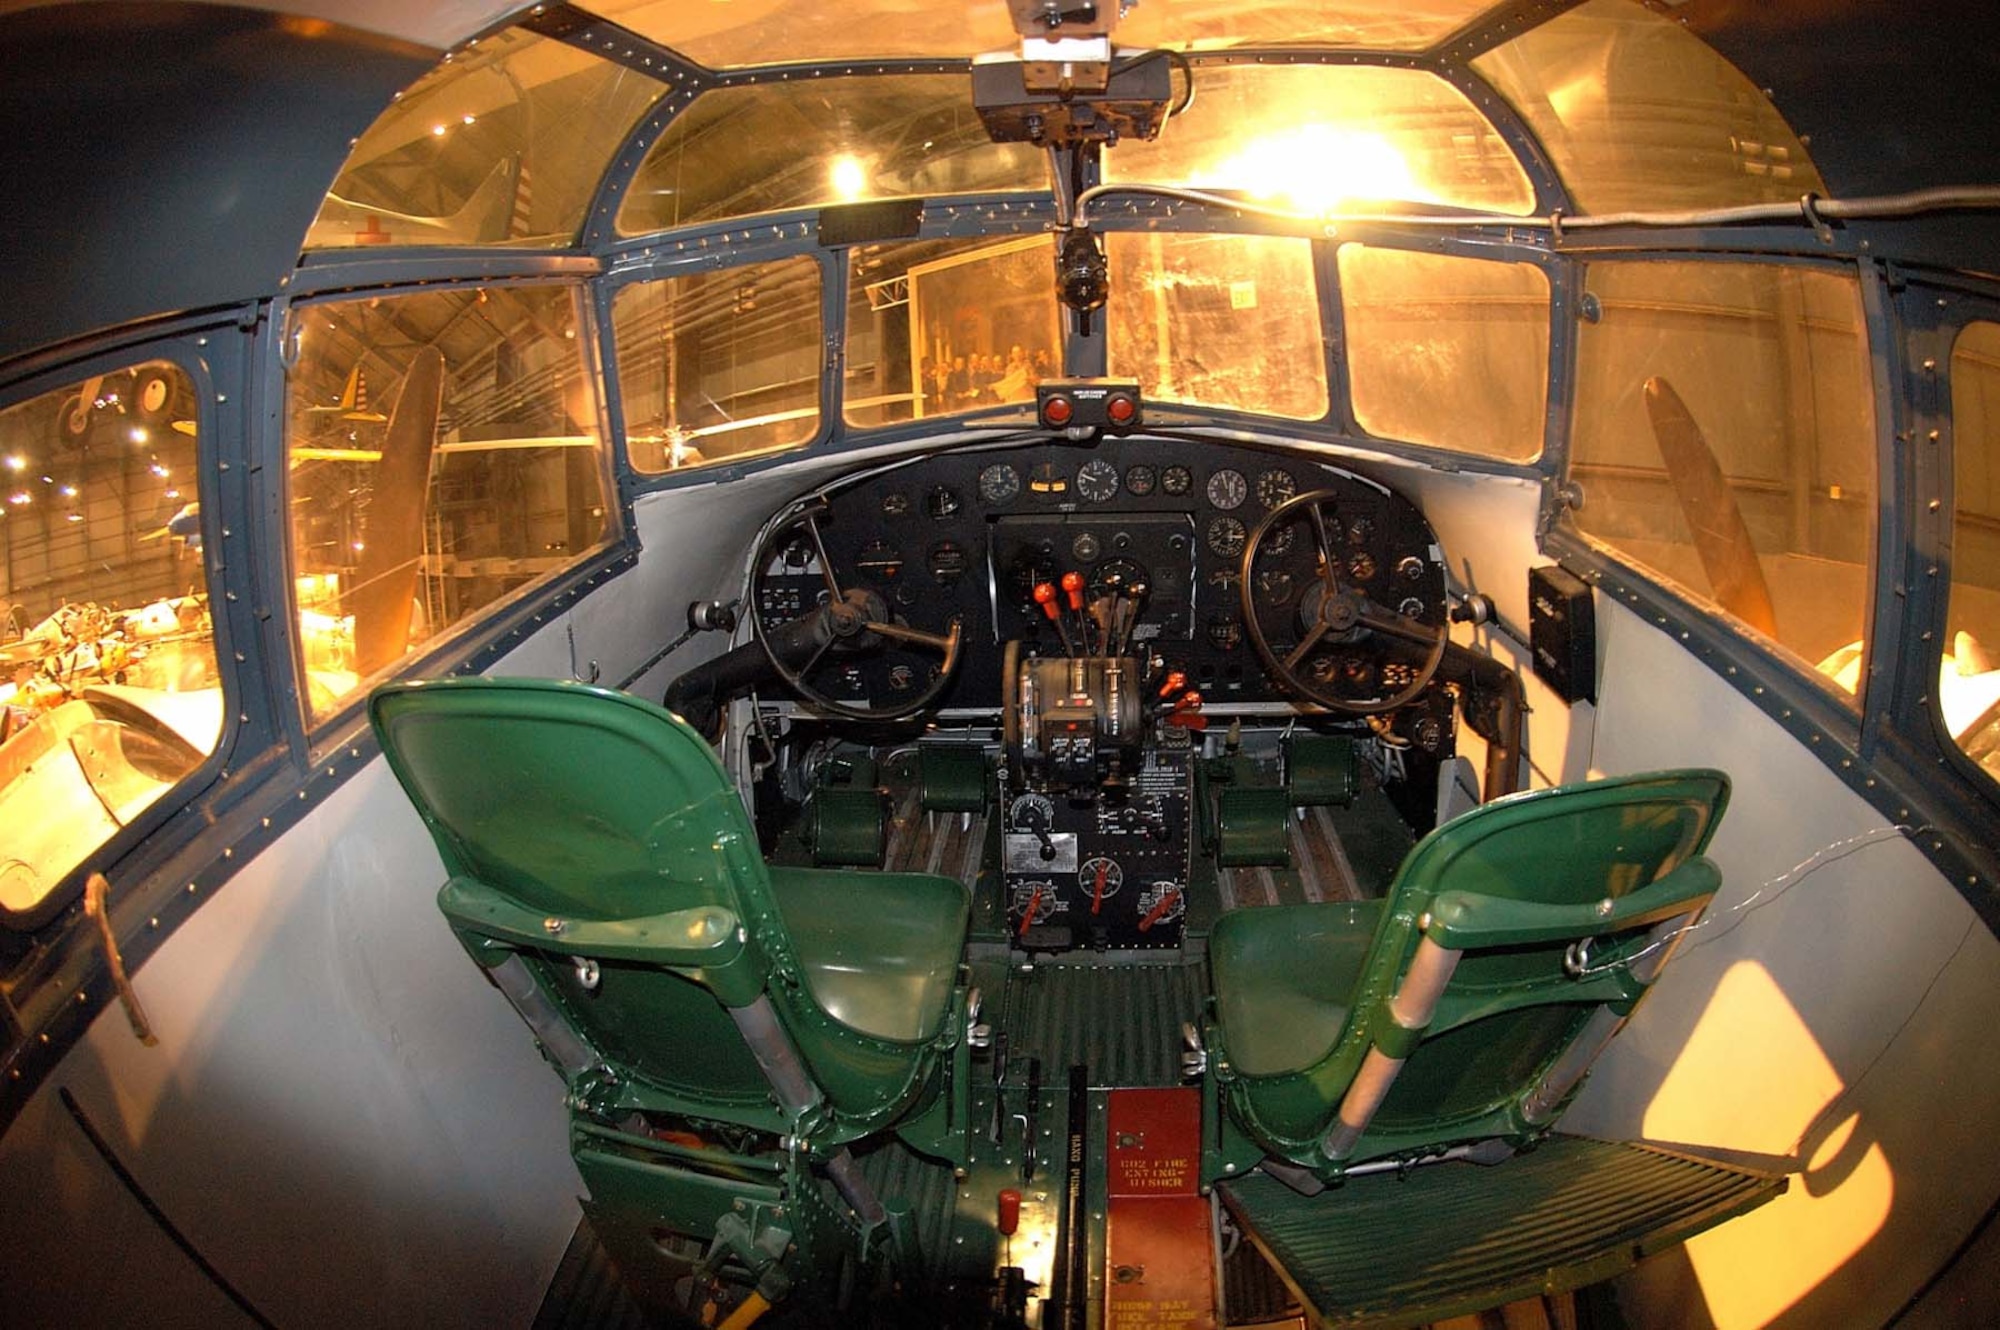 DAYTON, Ohio -- Douglas B-18 cockpit at the National Museum of the United States Air Force. (U.S. Air Force photo)